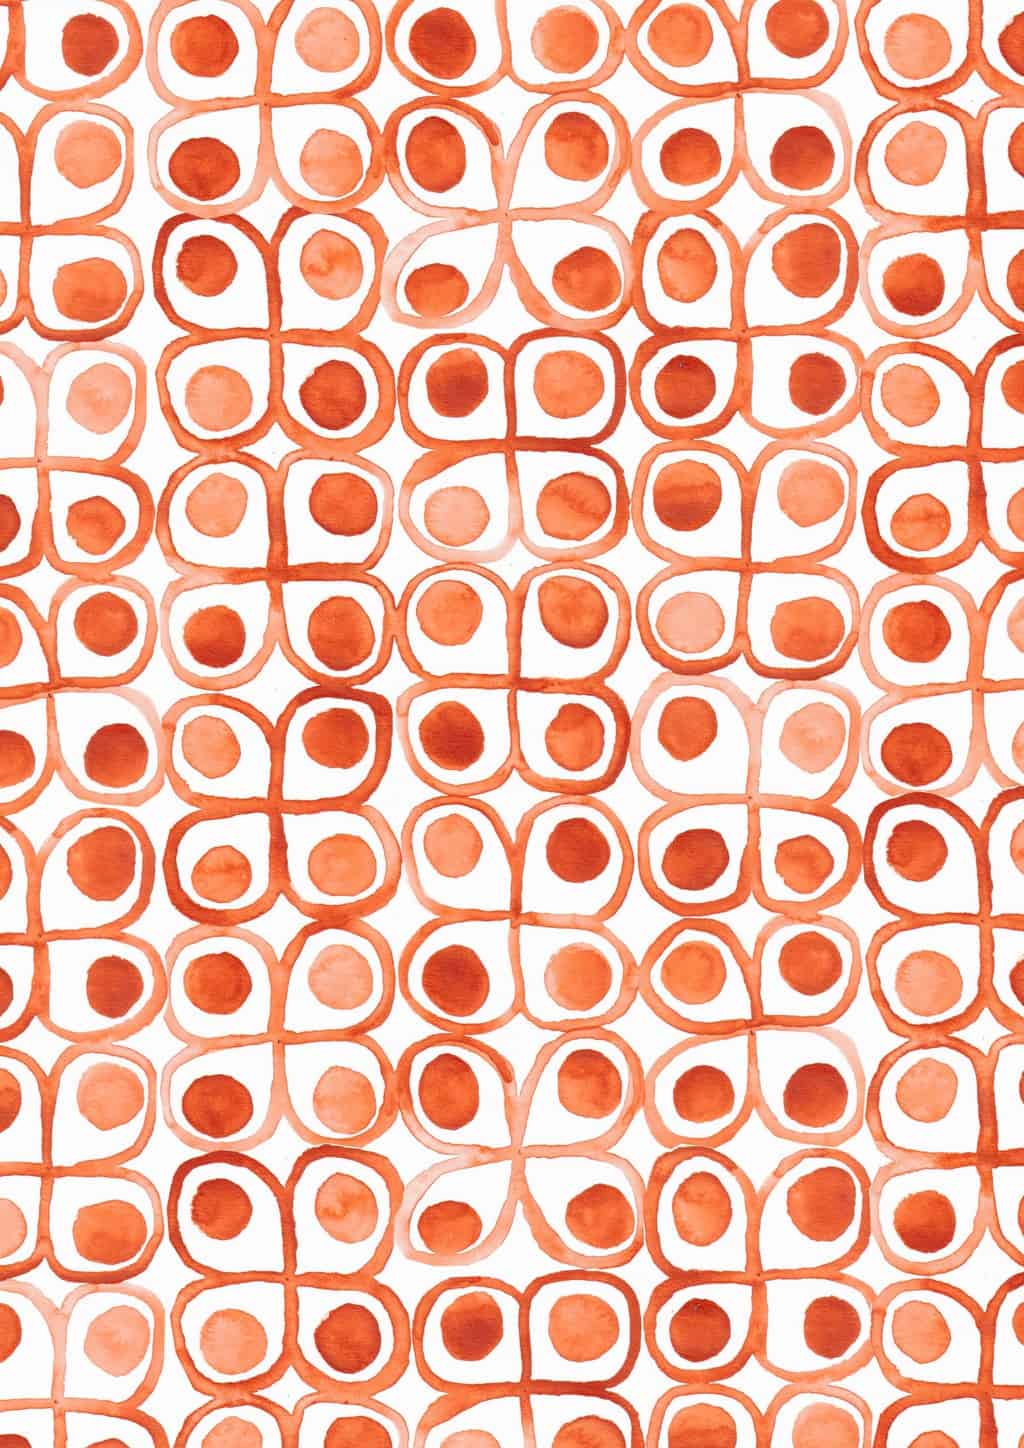 Repeating patterns with watercolour